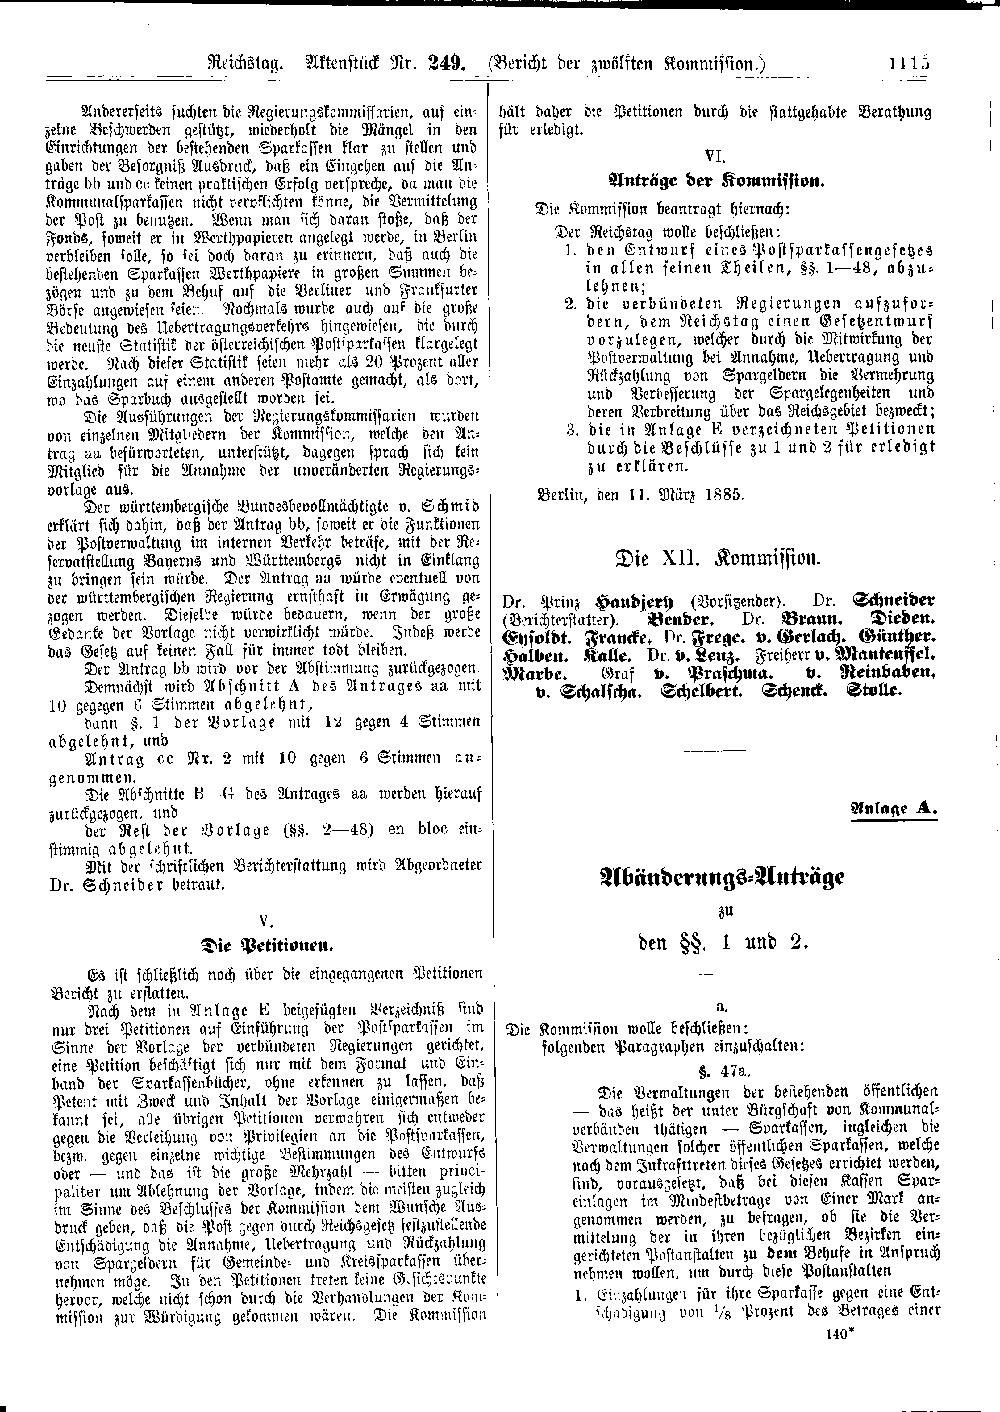 Scan of page 1115